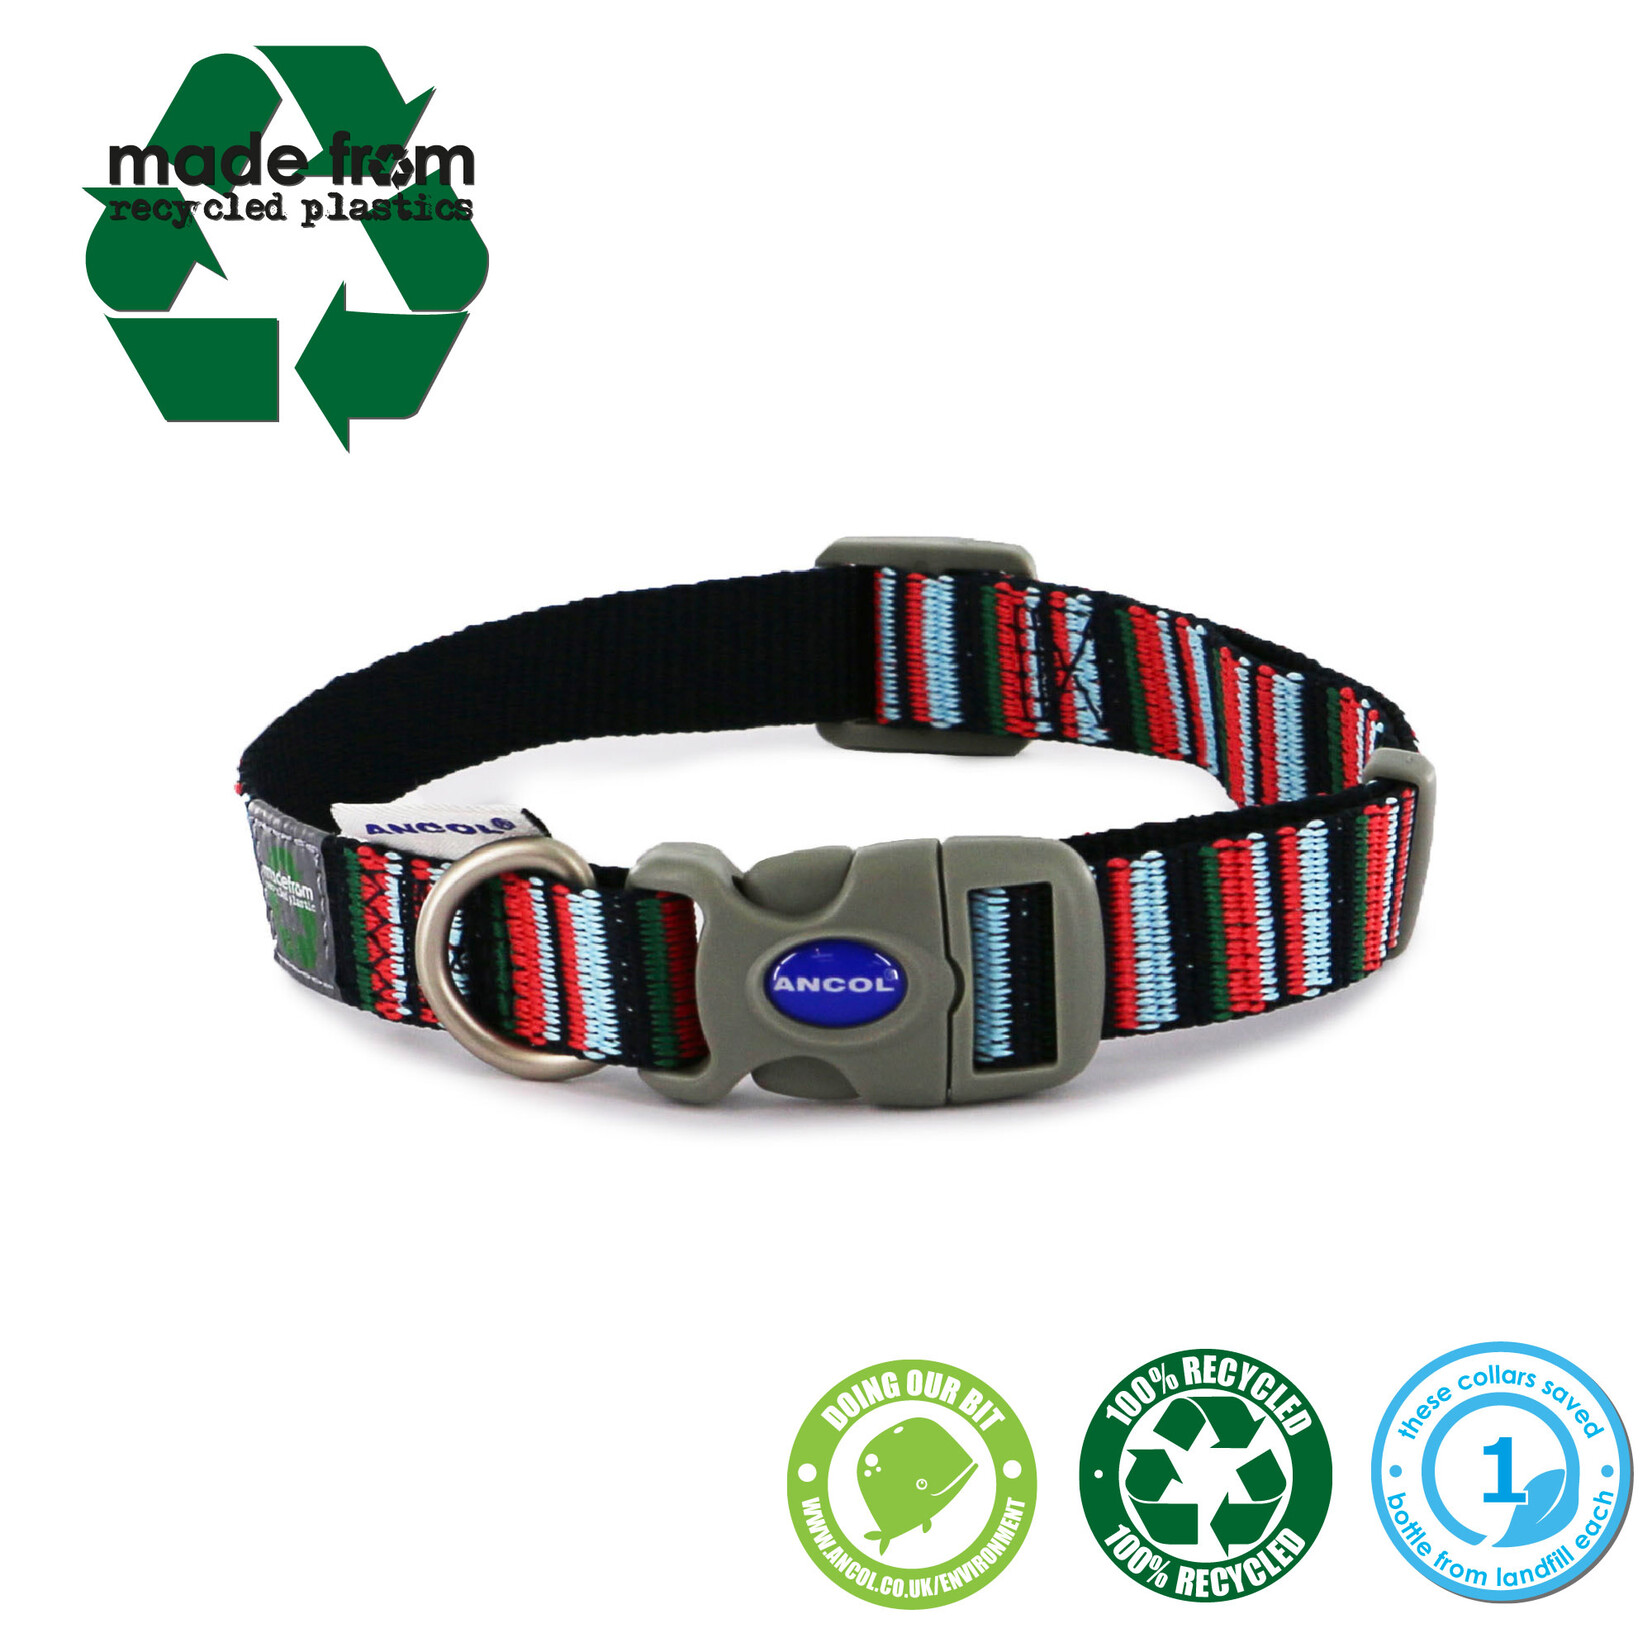 Ancol Adjustable Dog Collar Made From Recycled Materials, Navy Candy Stripe